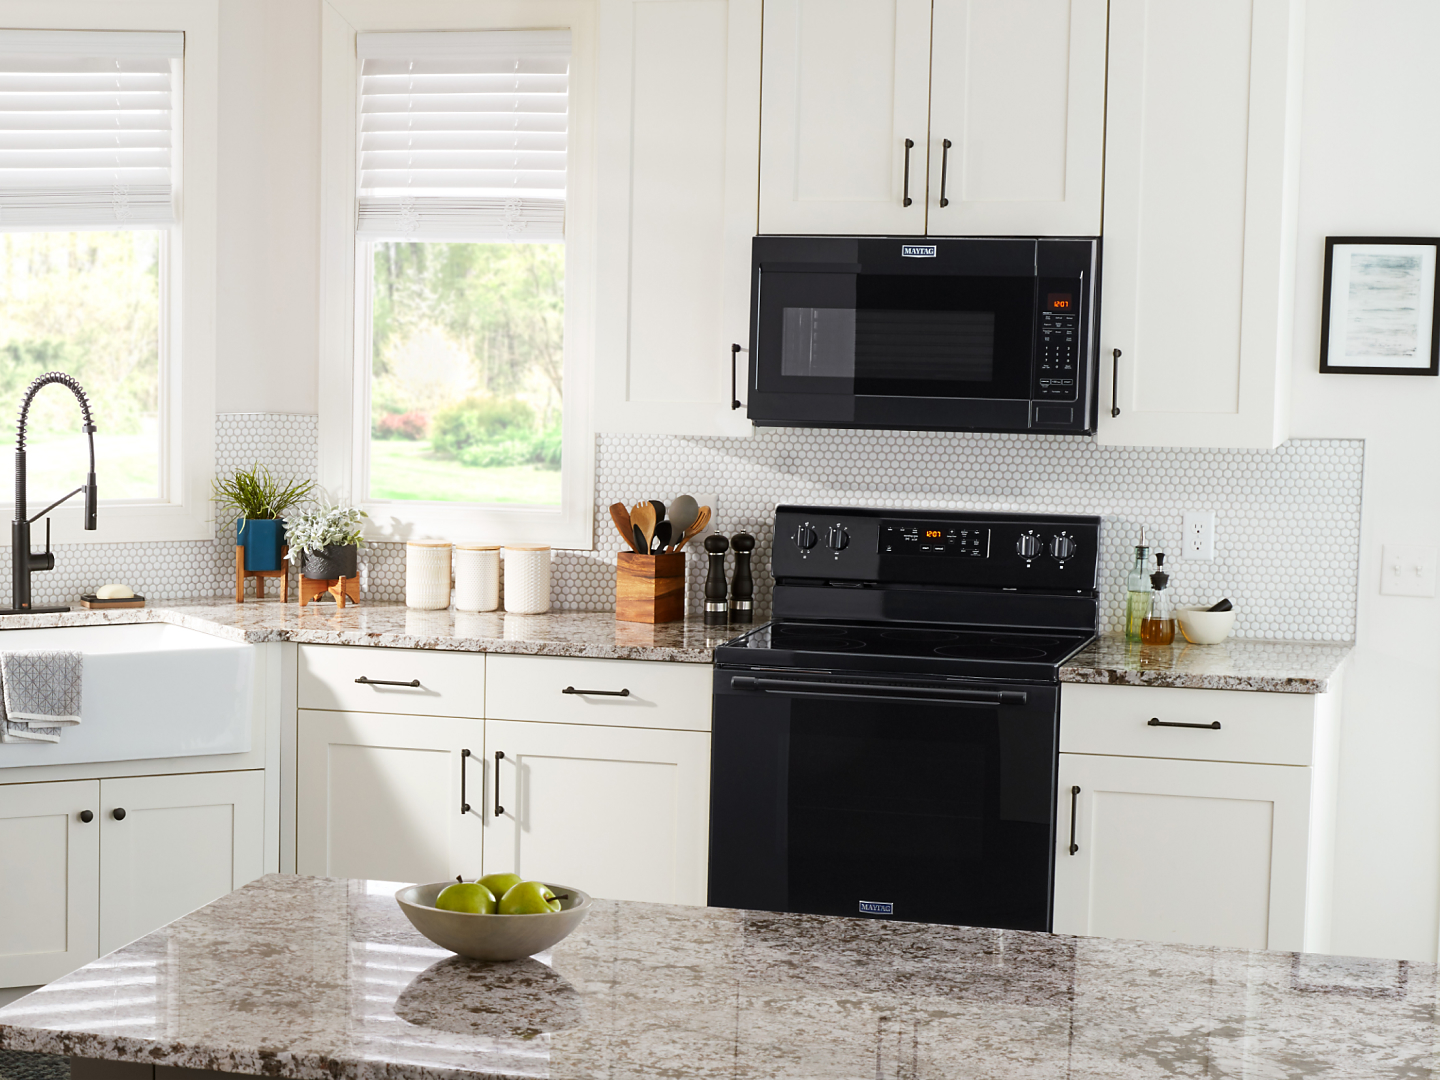 Where To Keep a Microwave in The Kitchen With a Small Countertop